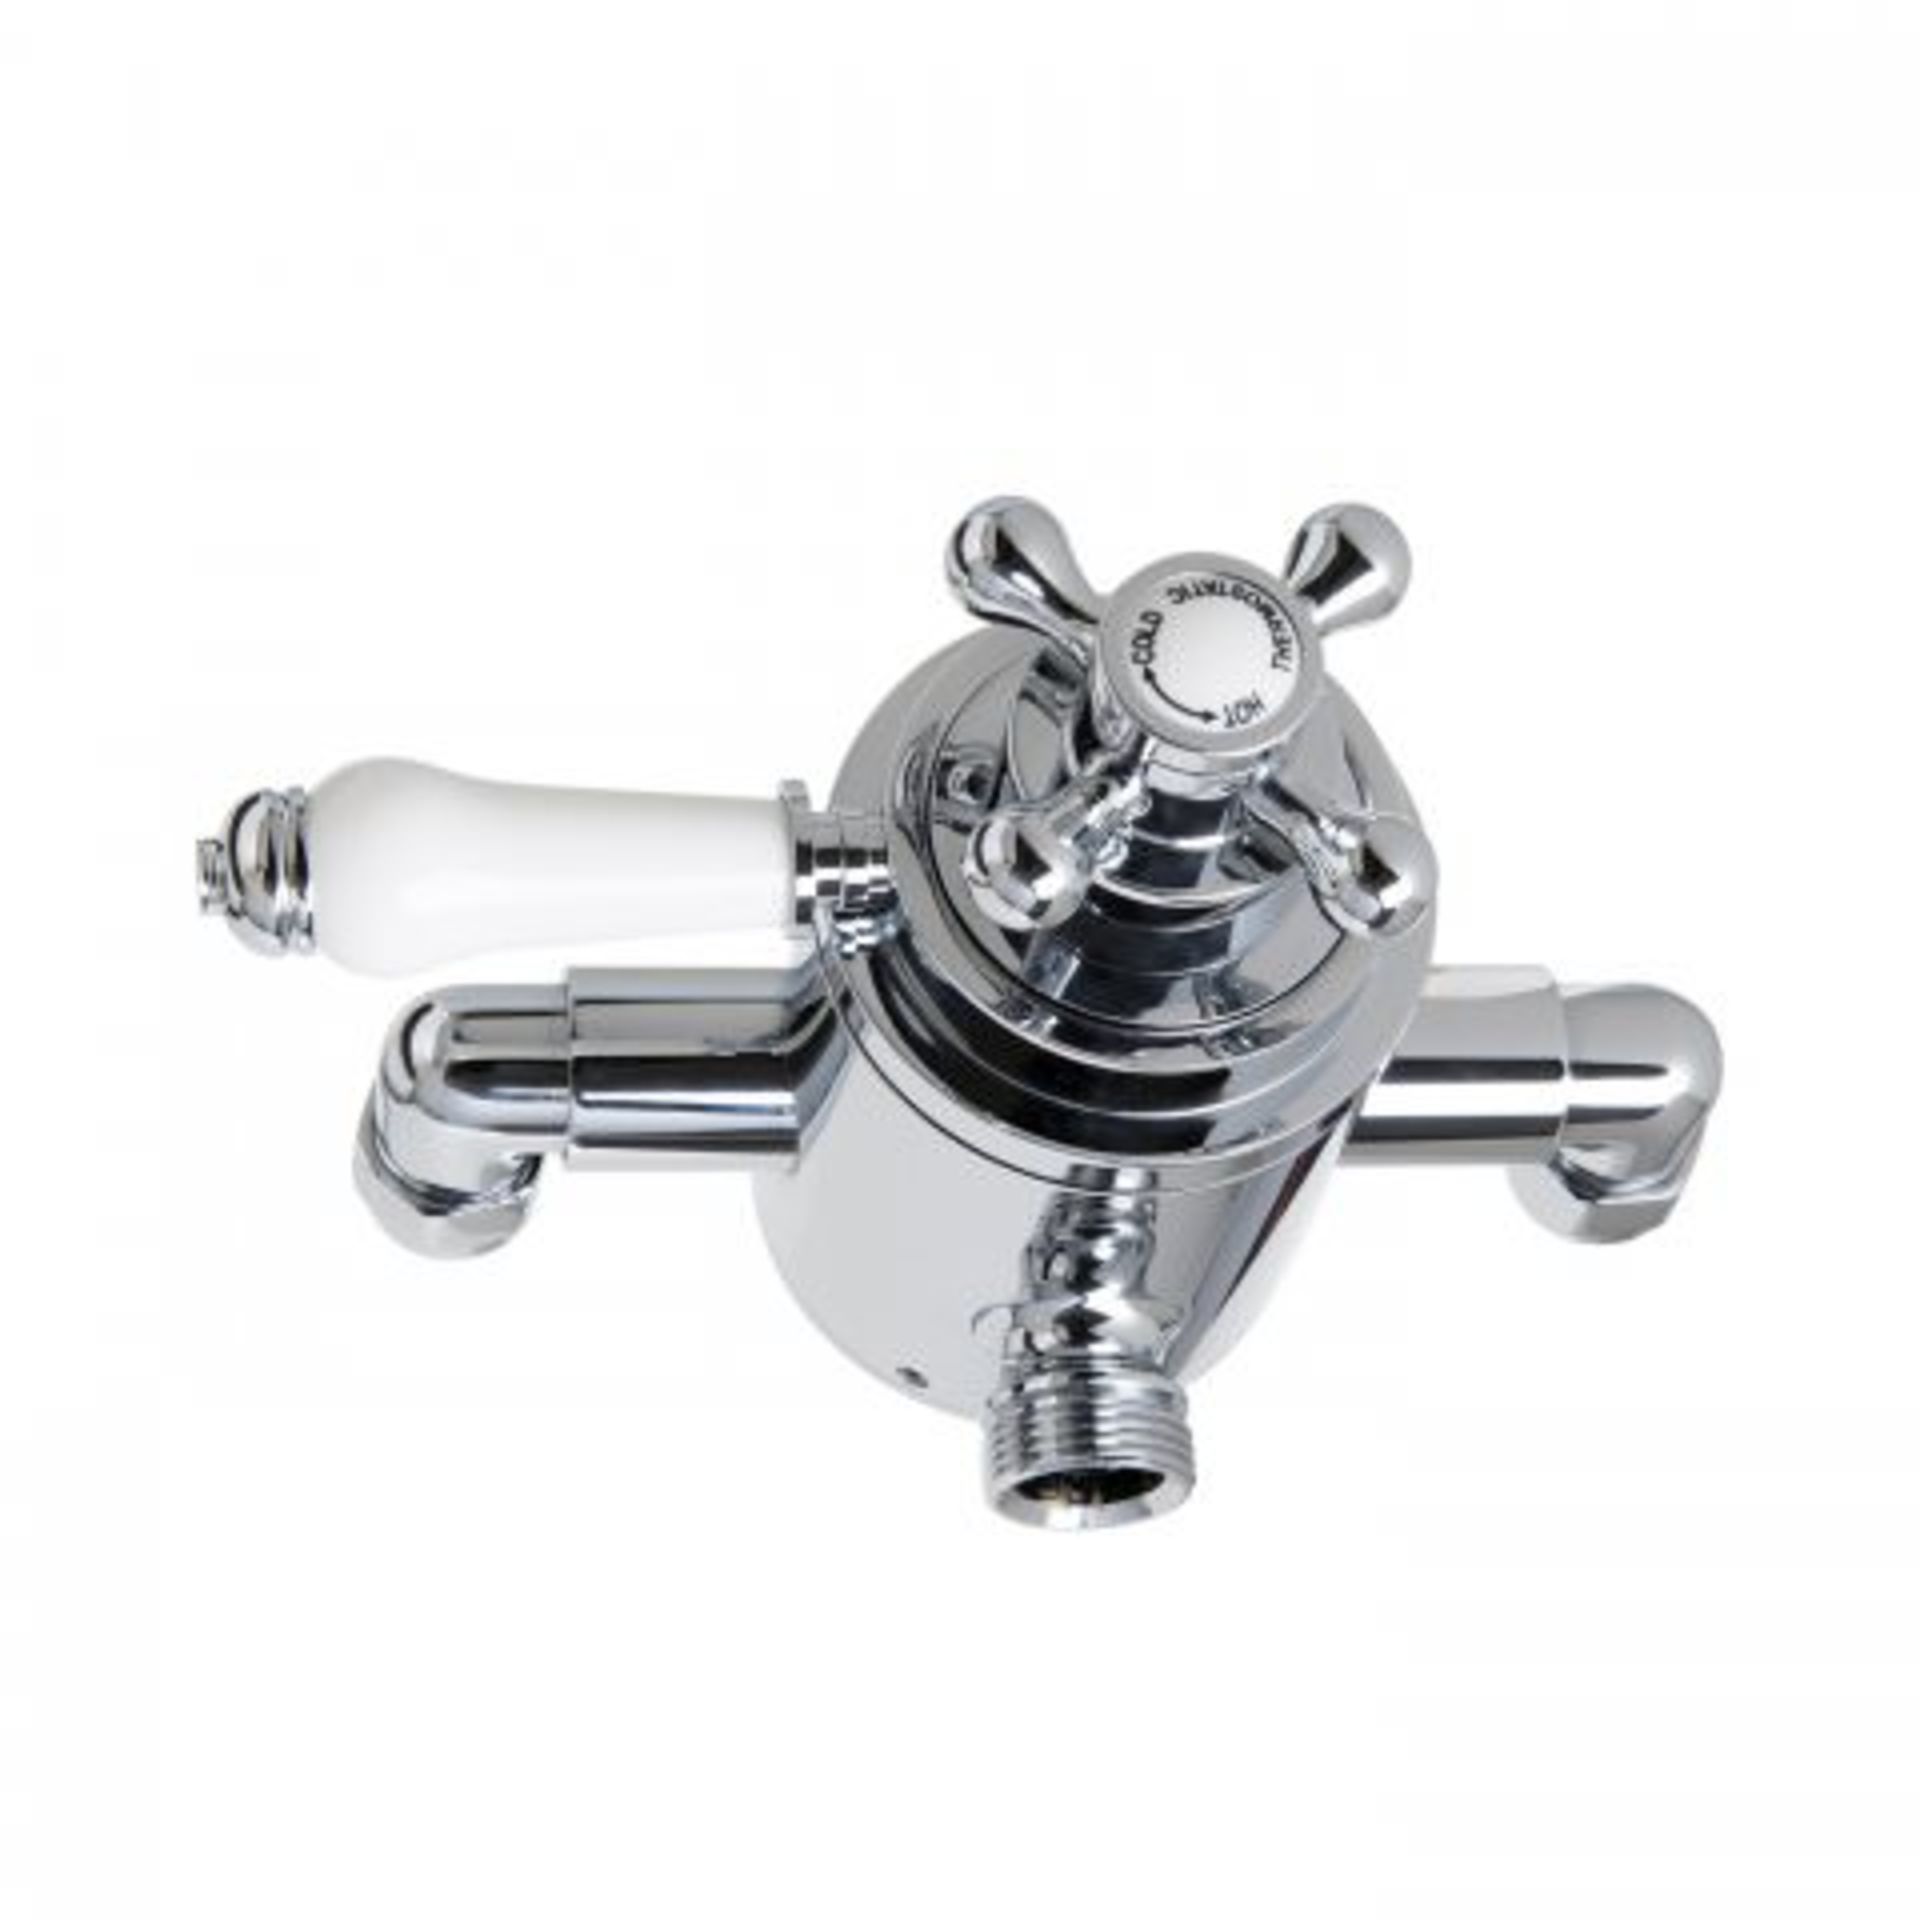 (W120) Traditional Concentric Exposed Thermostatic Valve. RRP £299.99. For a cool, understated - Image 3 of 3